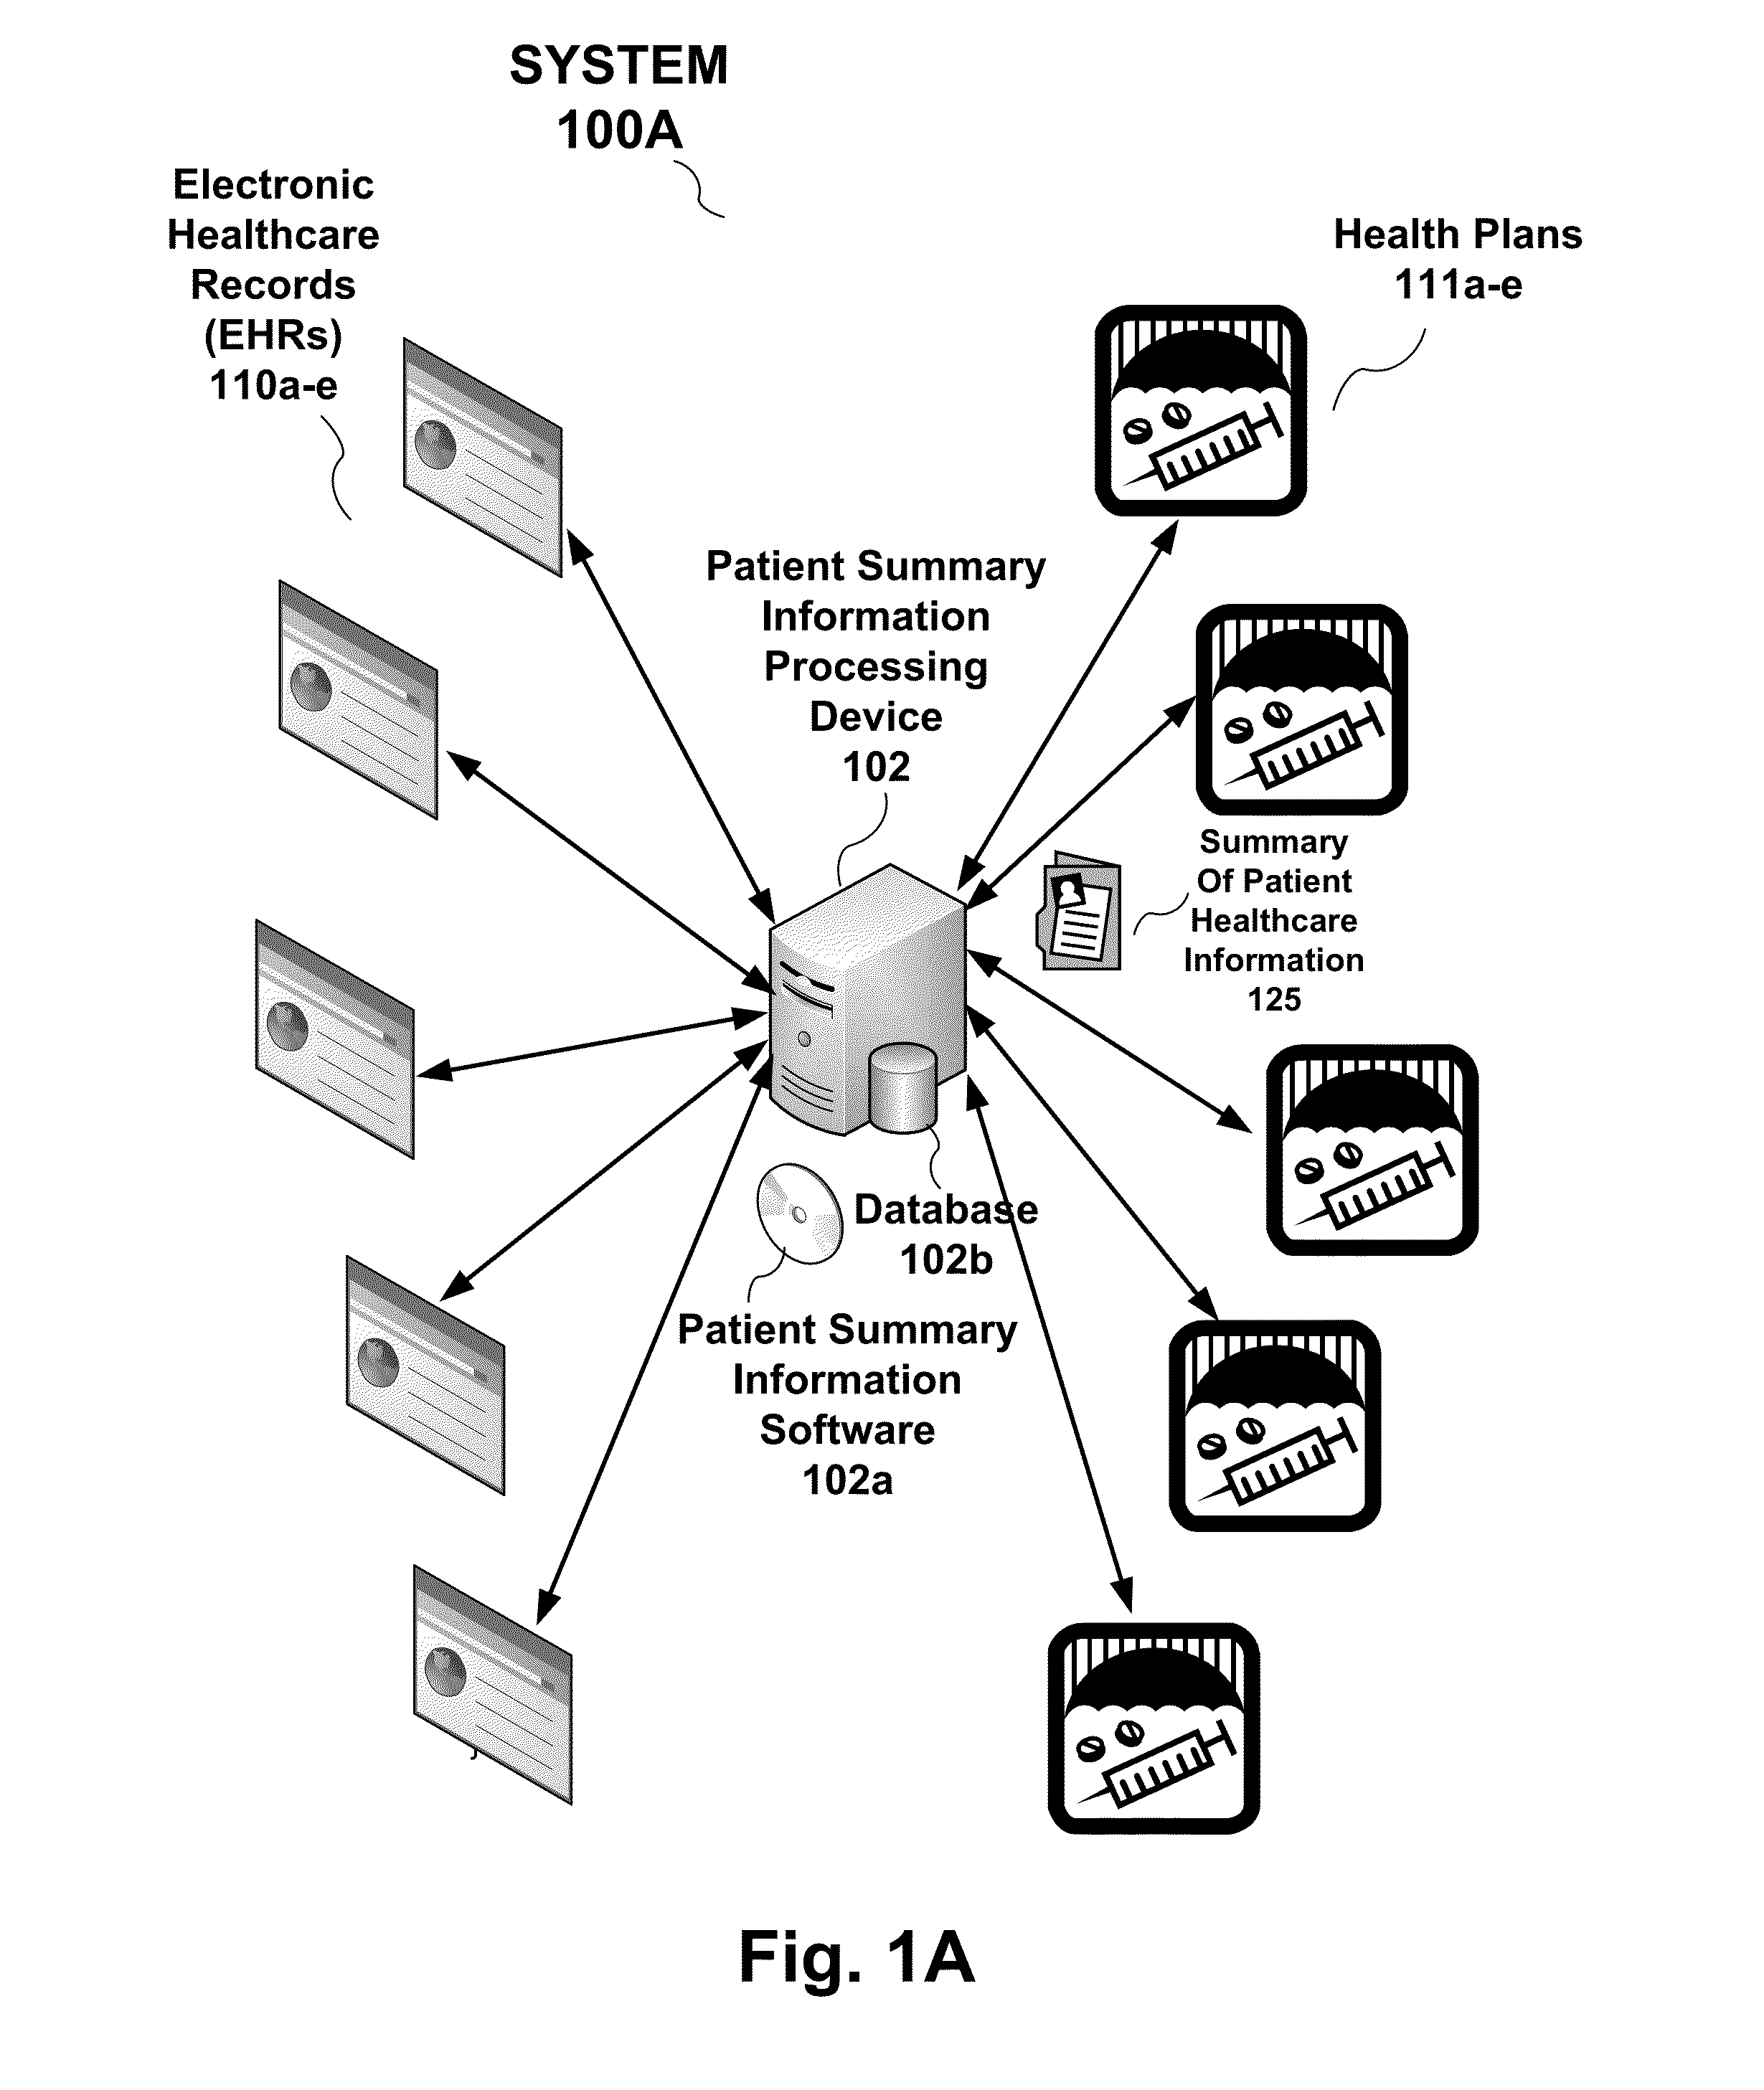 System, processing device and method to provide a summary of patient healthcare information to an electronic health record from a health plan provider